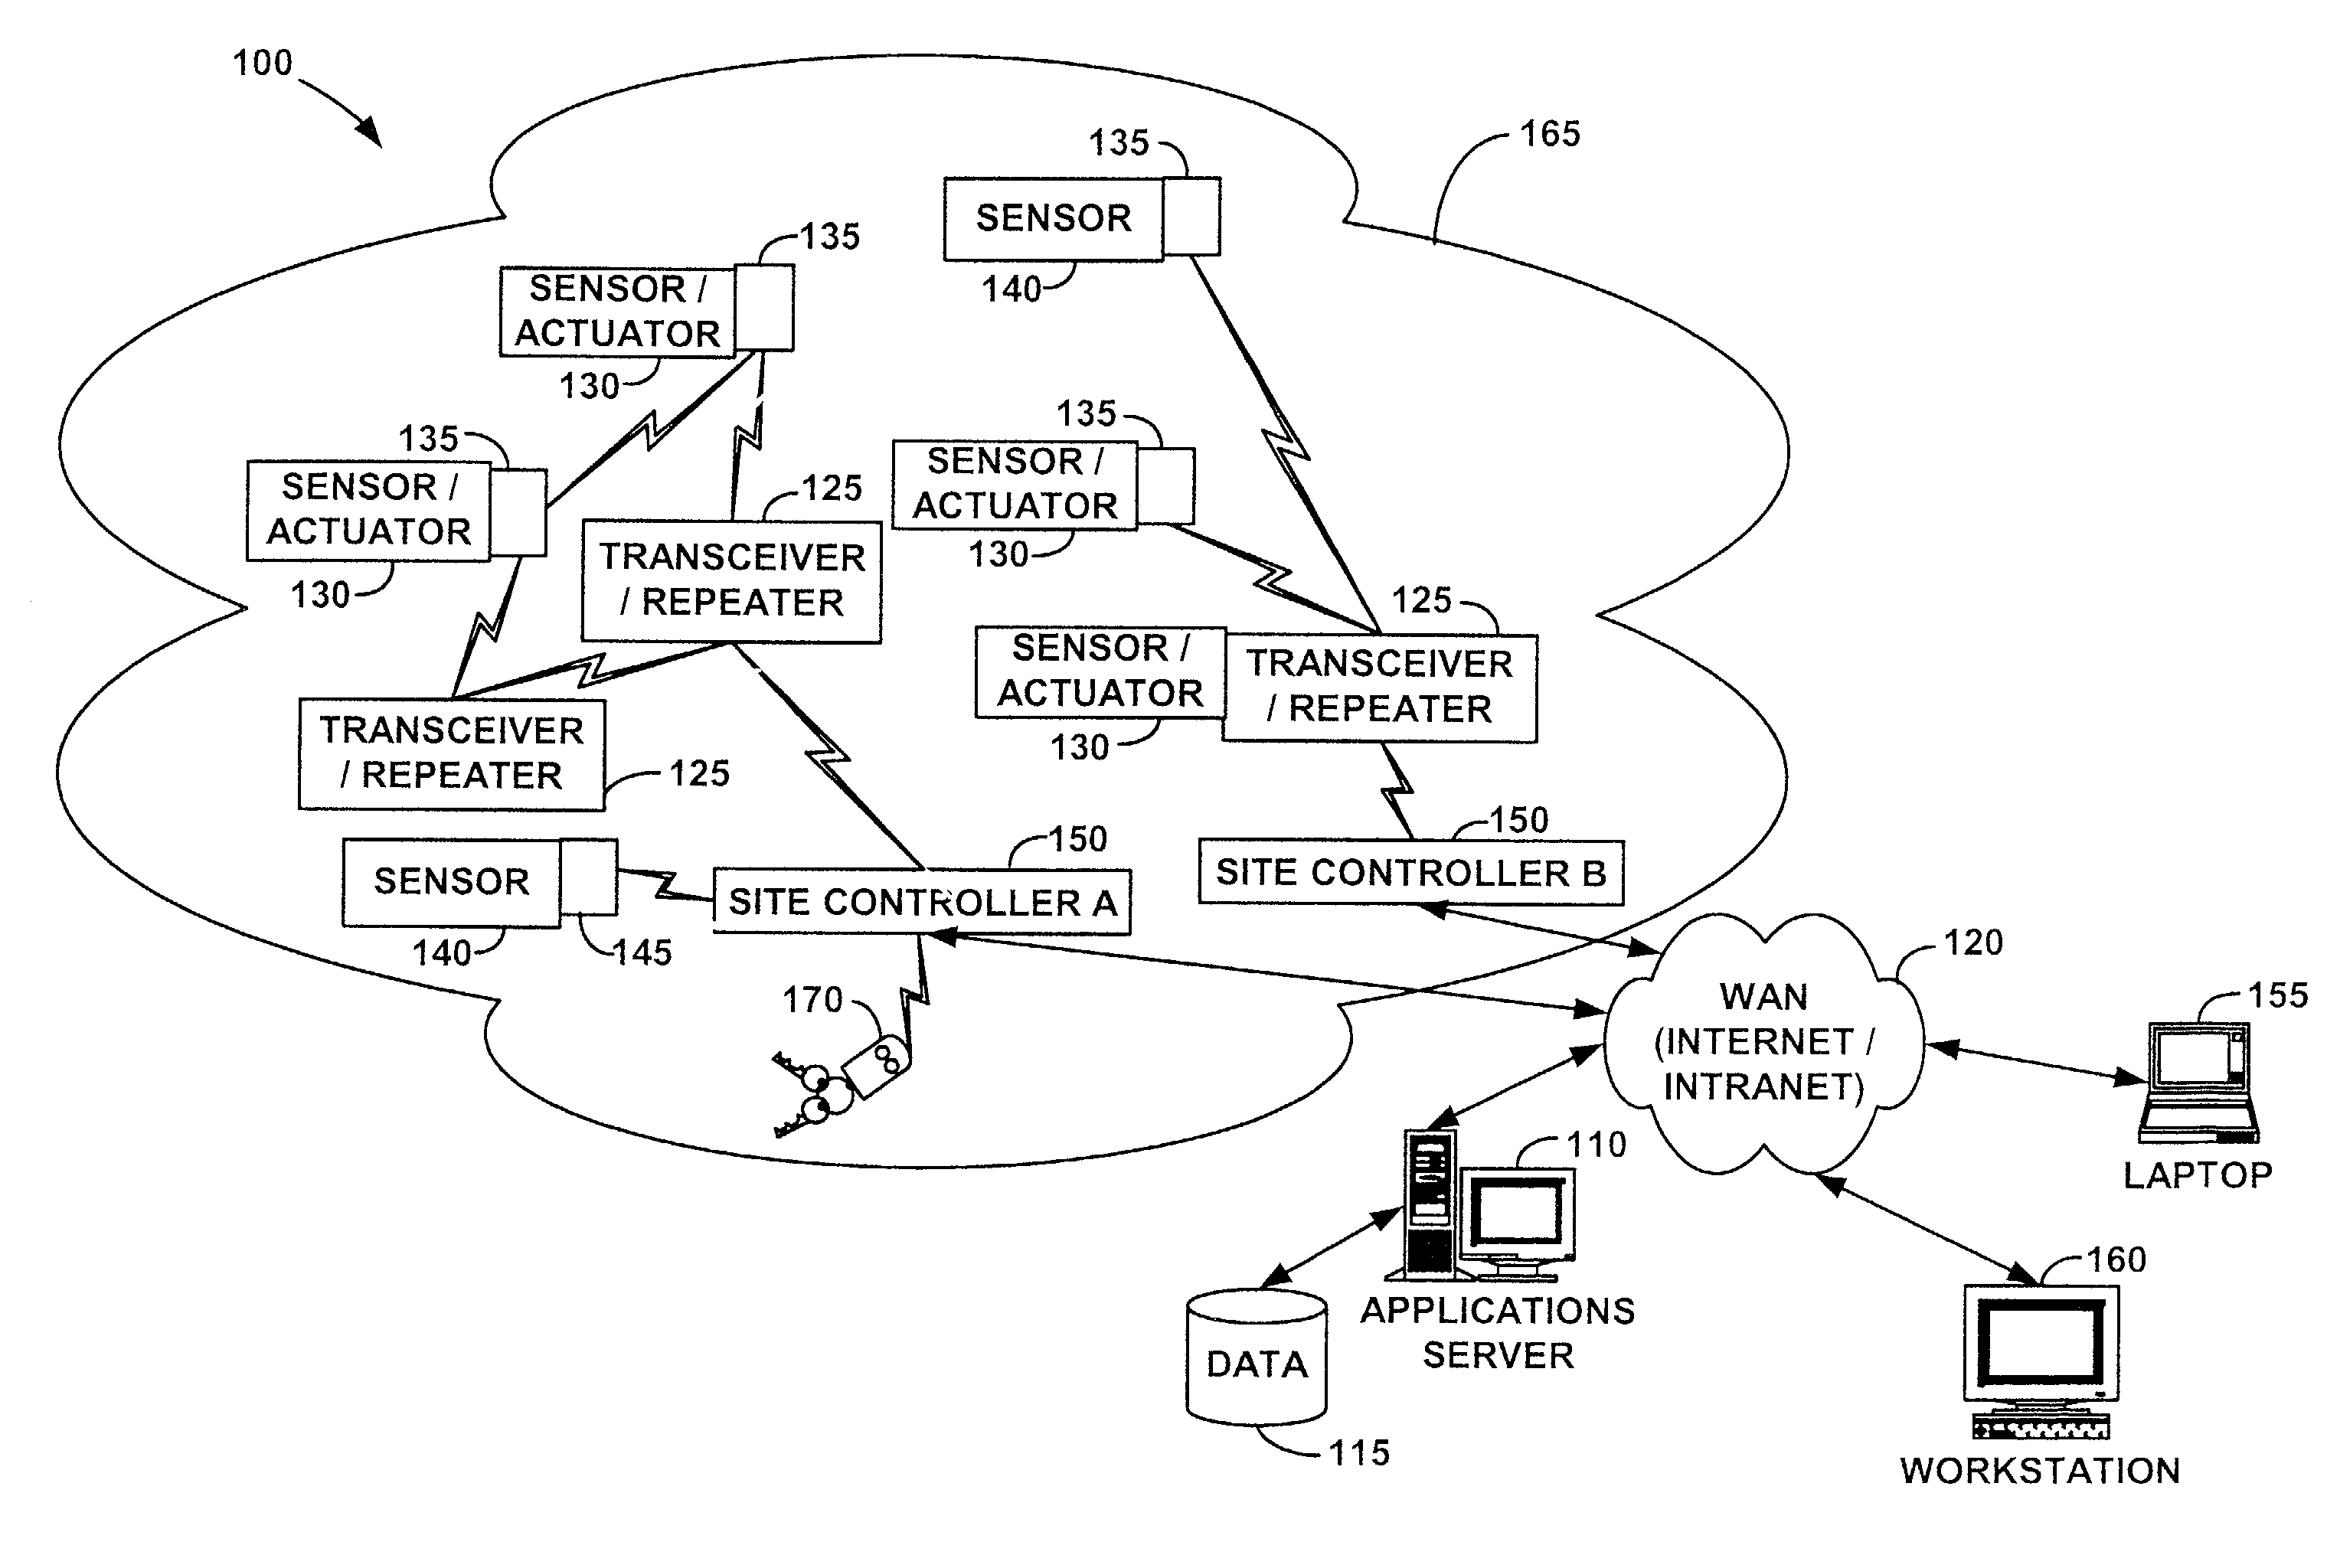 Systems and methods for enabling a mobile user to notify an automated monitoring system of an emergency situation